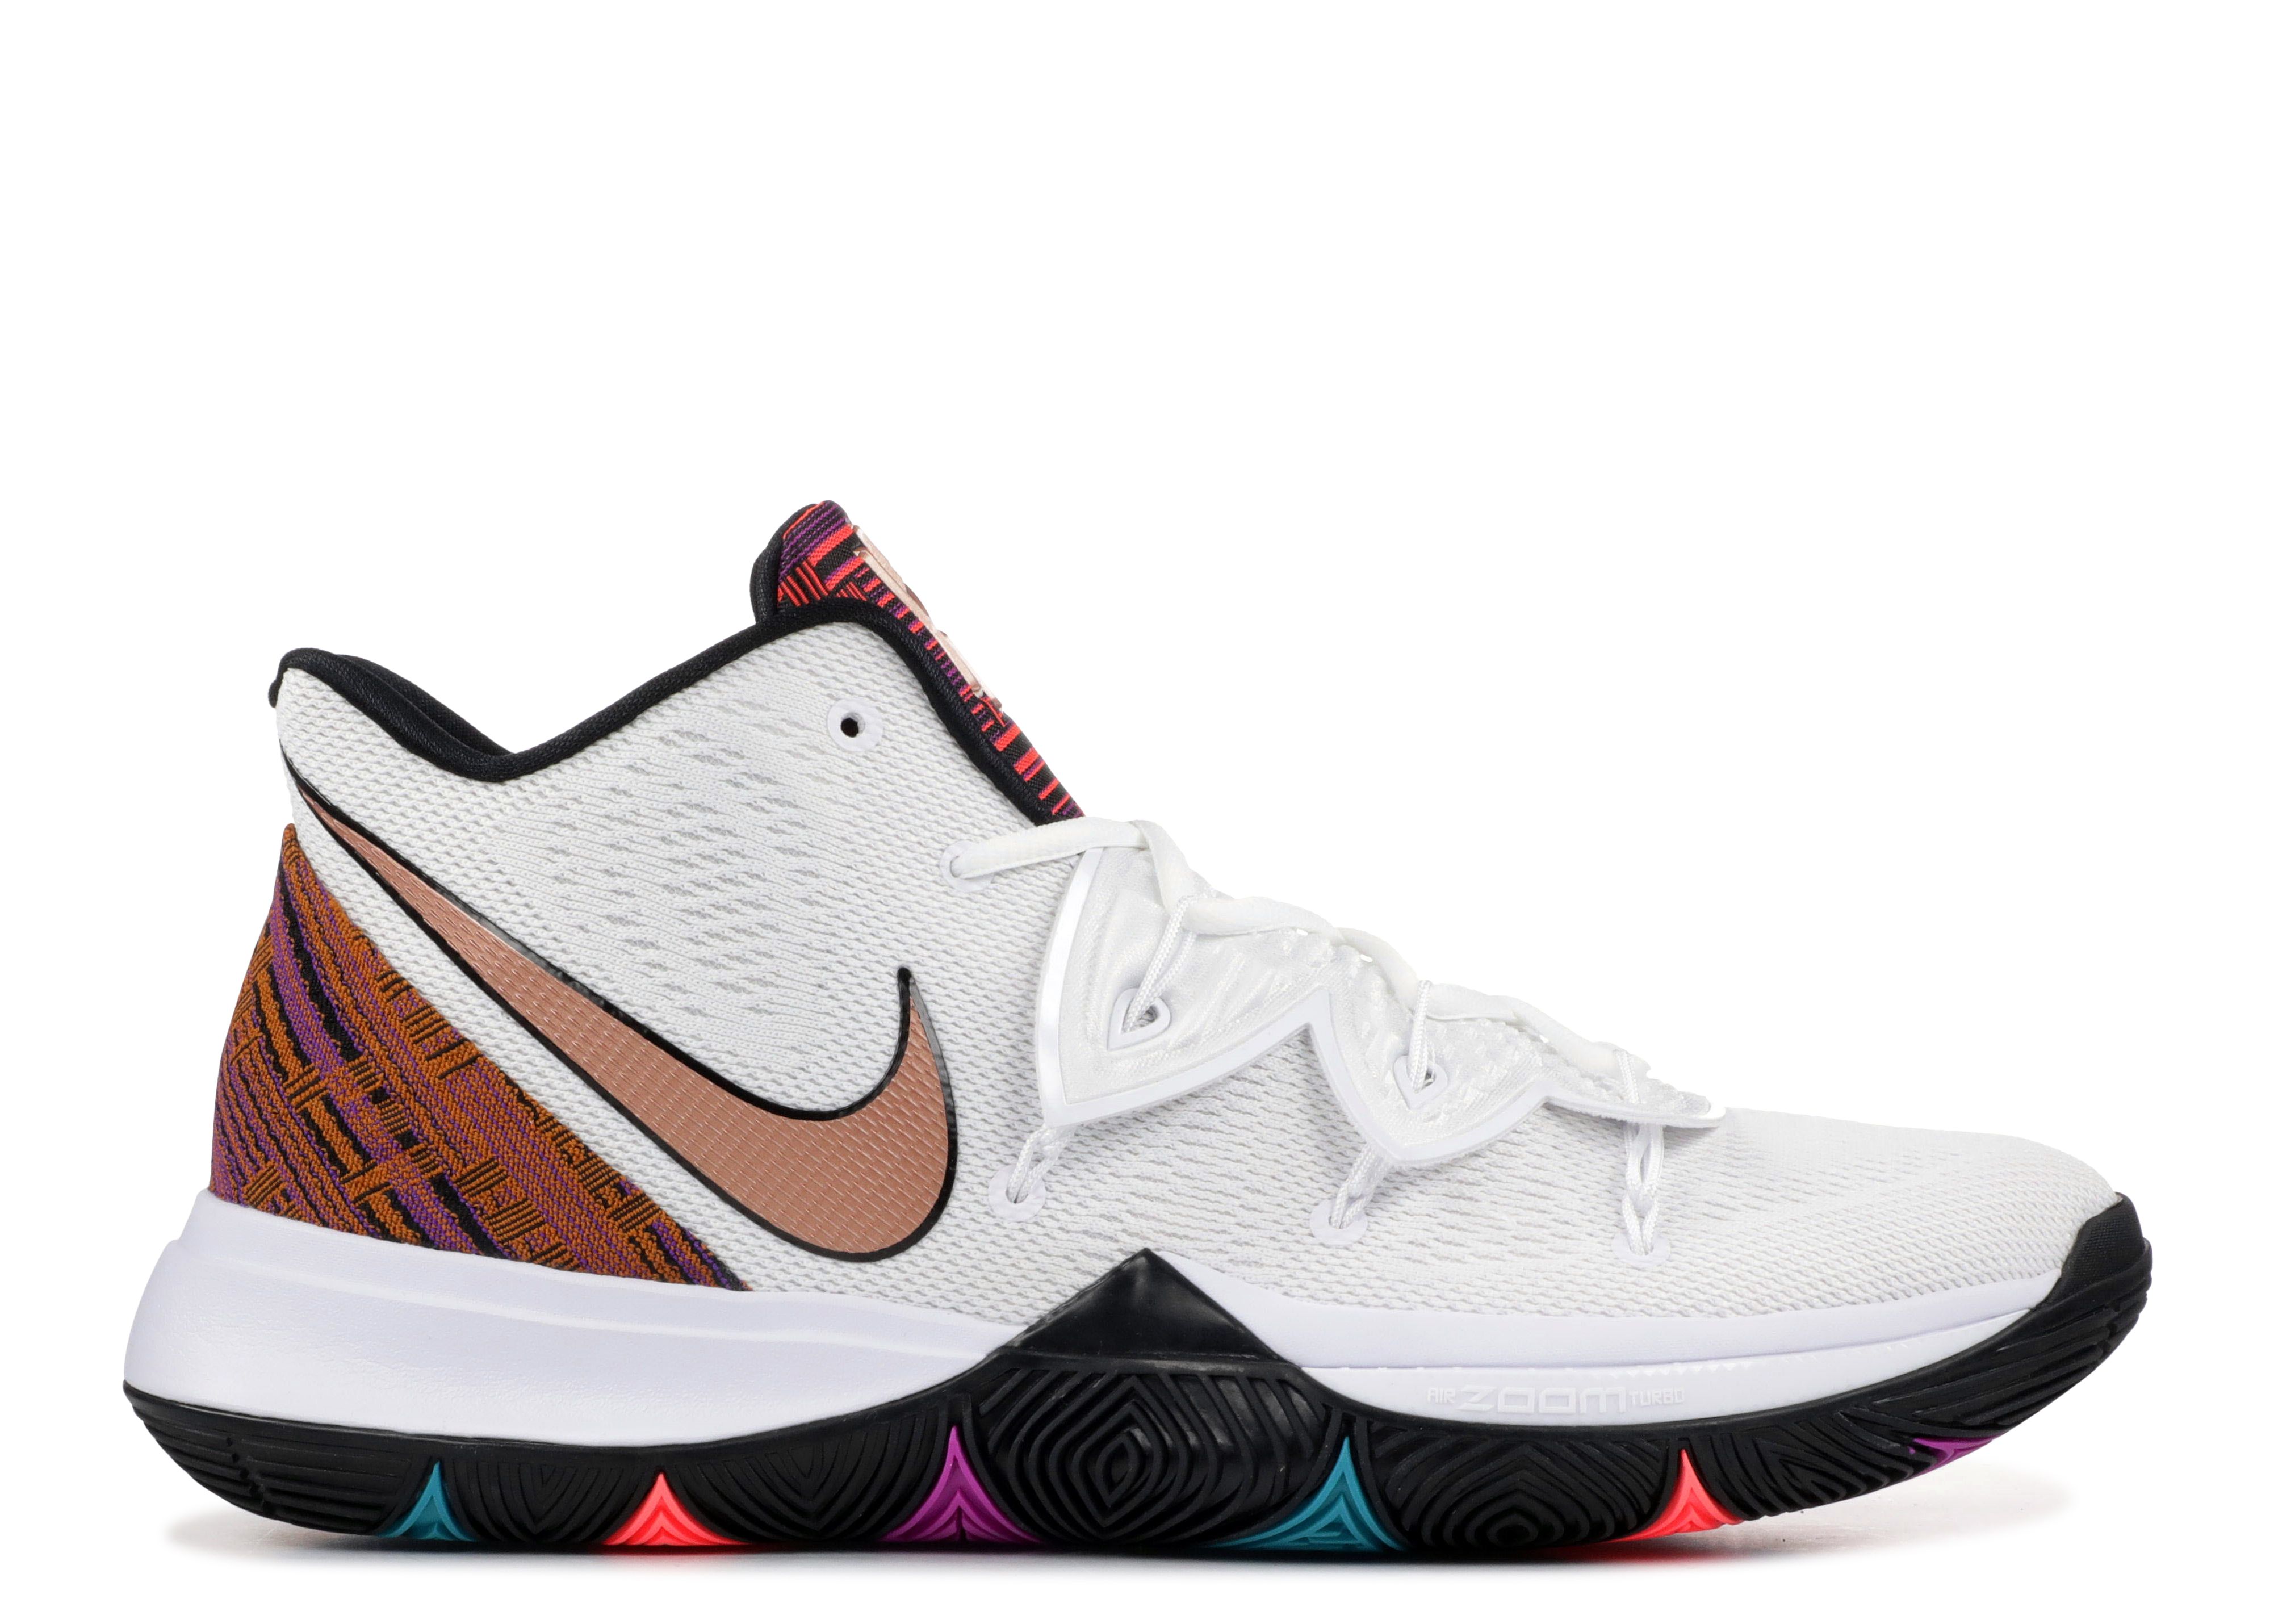 kyrie 5 black history month 2019